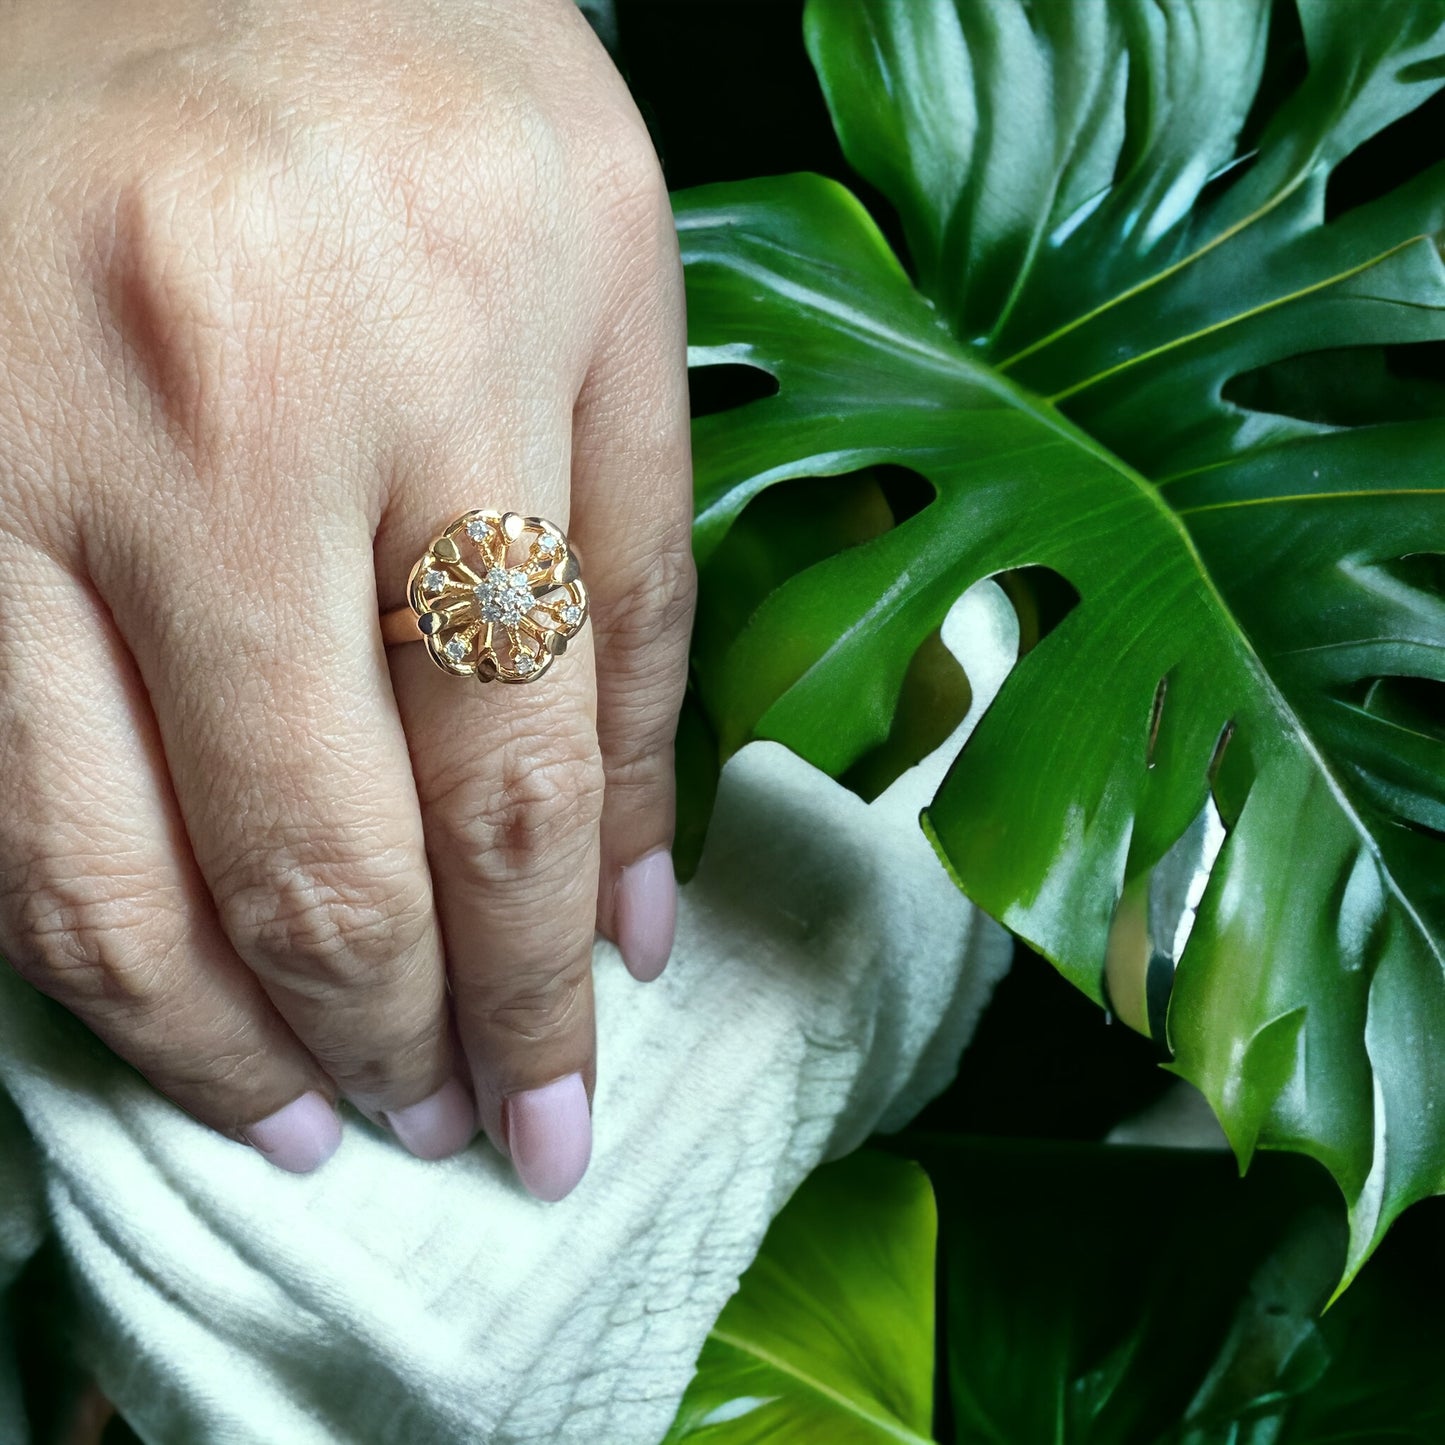 Dian Gold-Plated Ring with White Stones - A Timeless Blend of Elegance and Simplicity